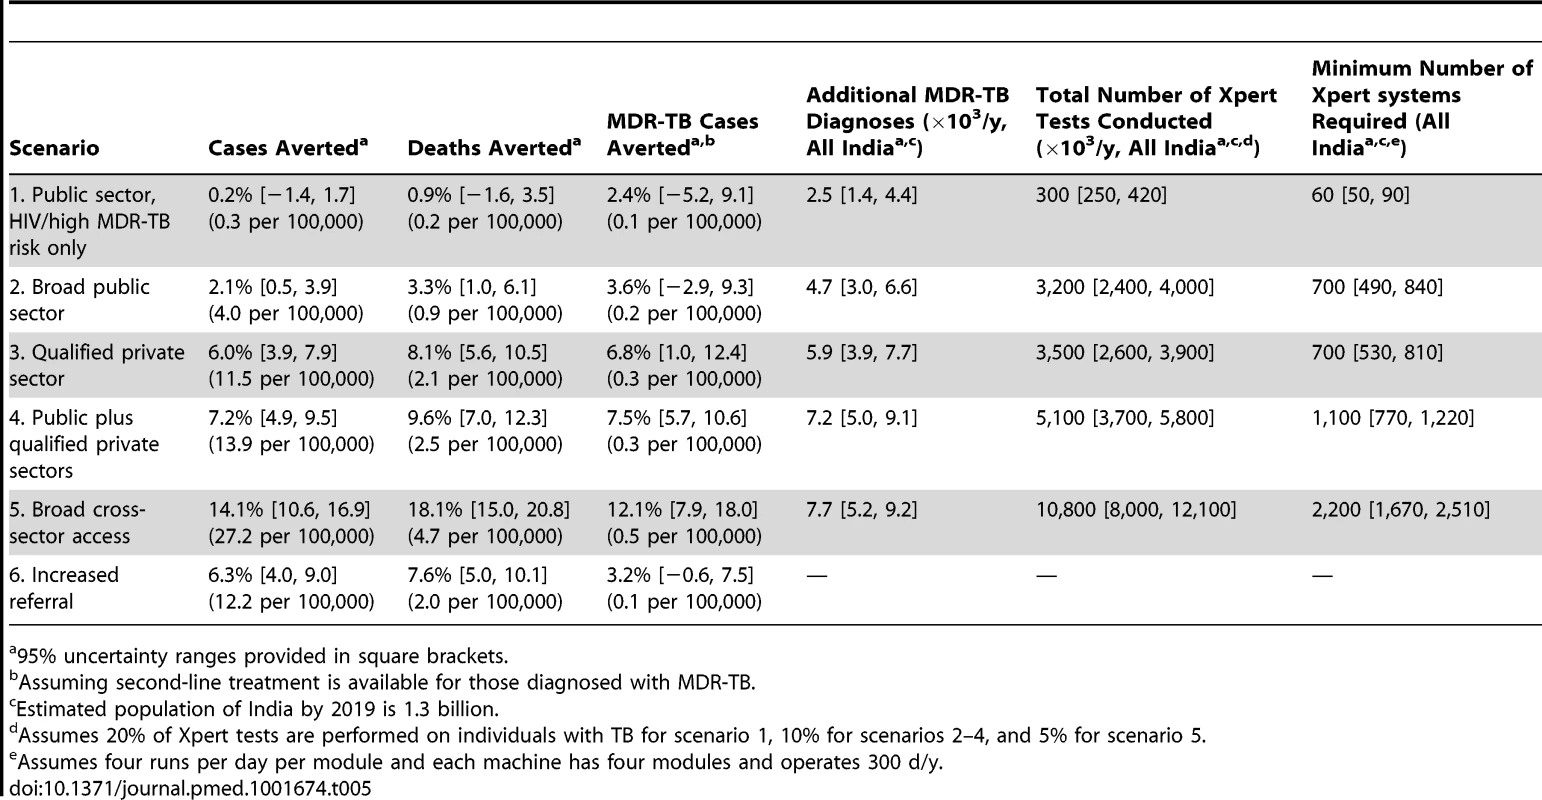 Effect of Xpert rollout on annual TB incidence and mortality after 5